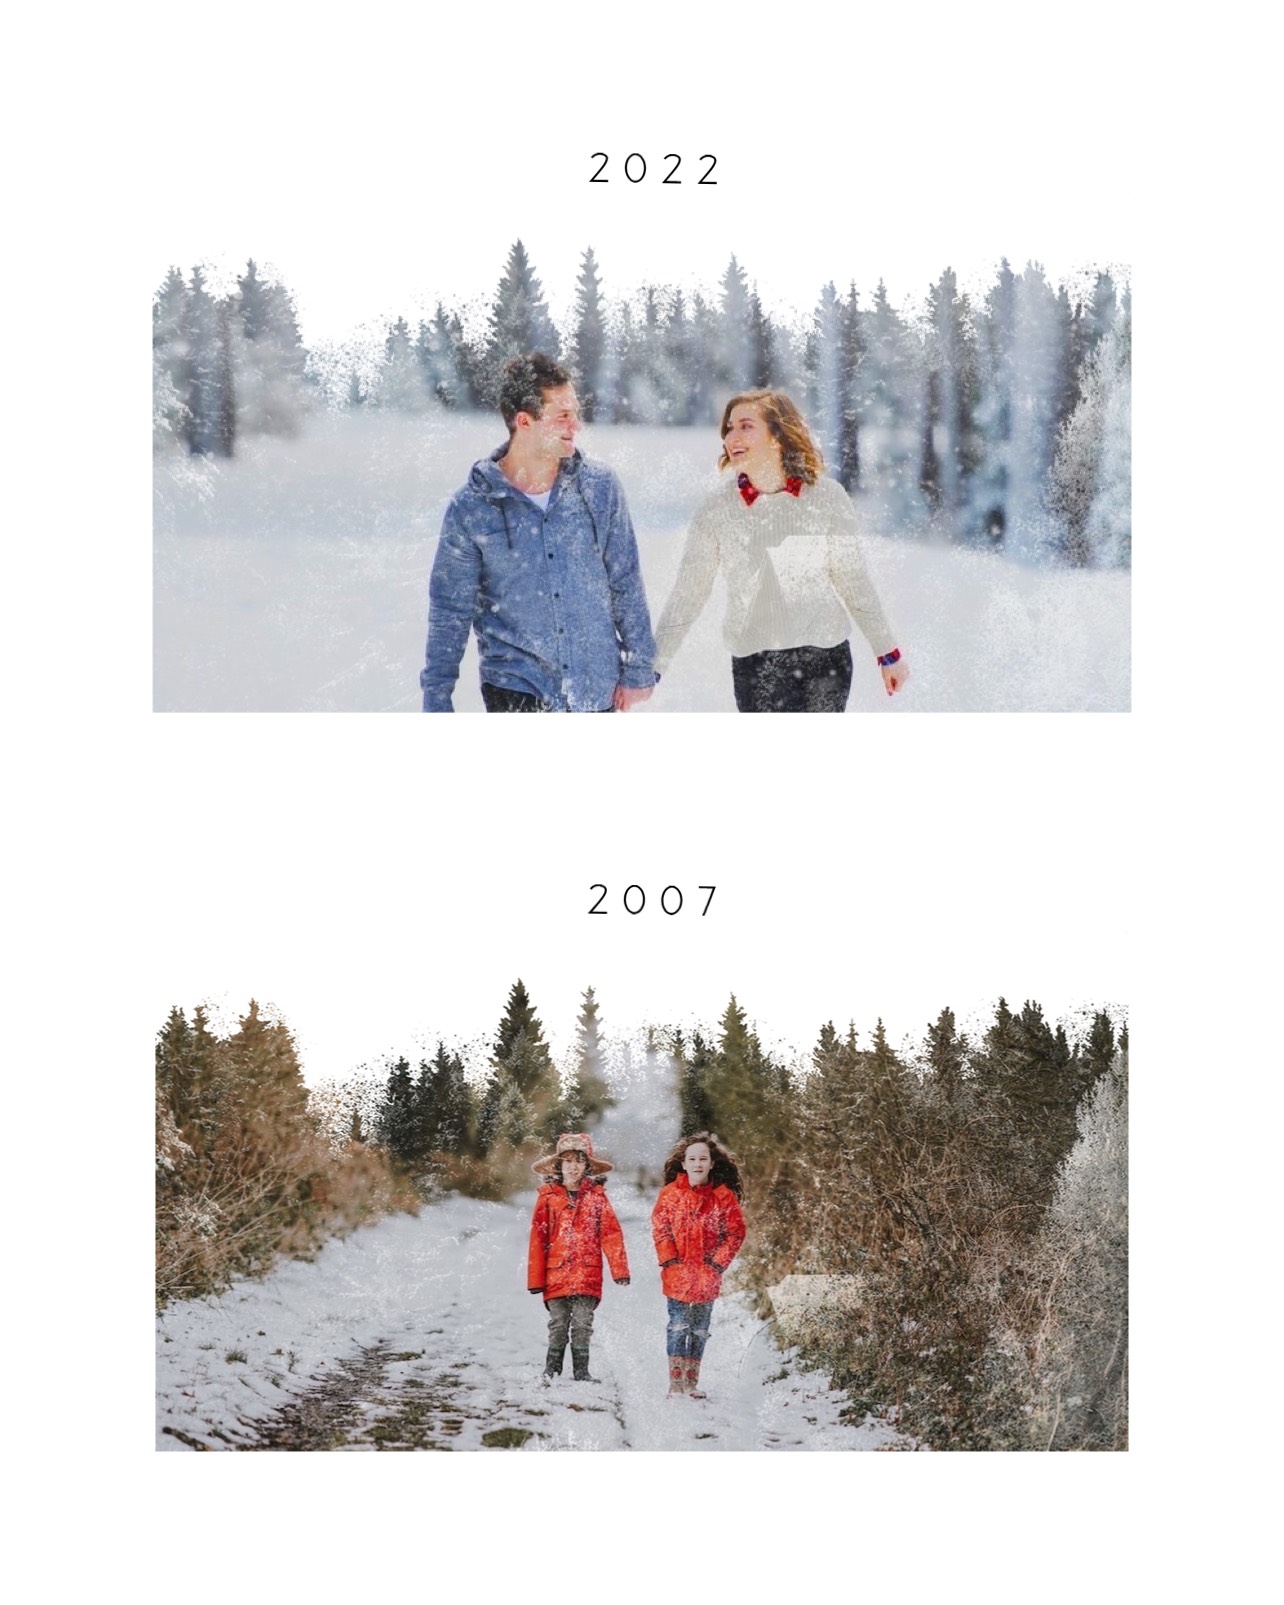 A Couple Walking Through The Snow In The Woods Winter Wonderland Template